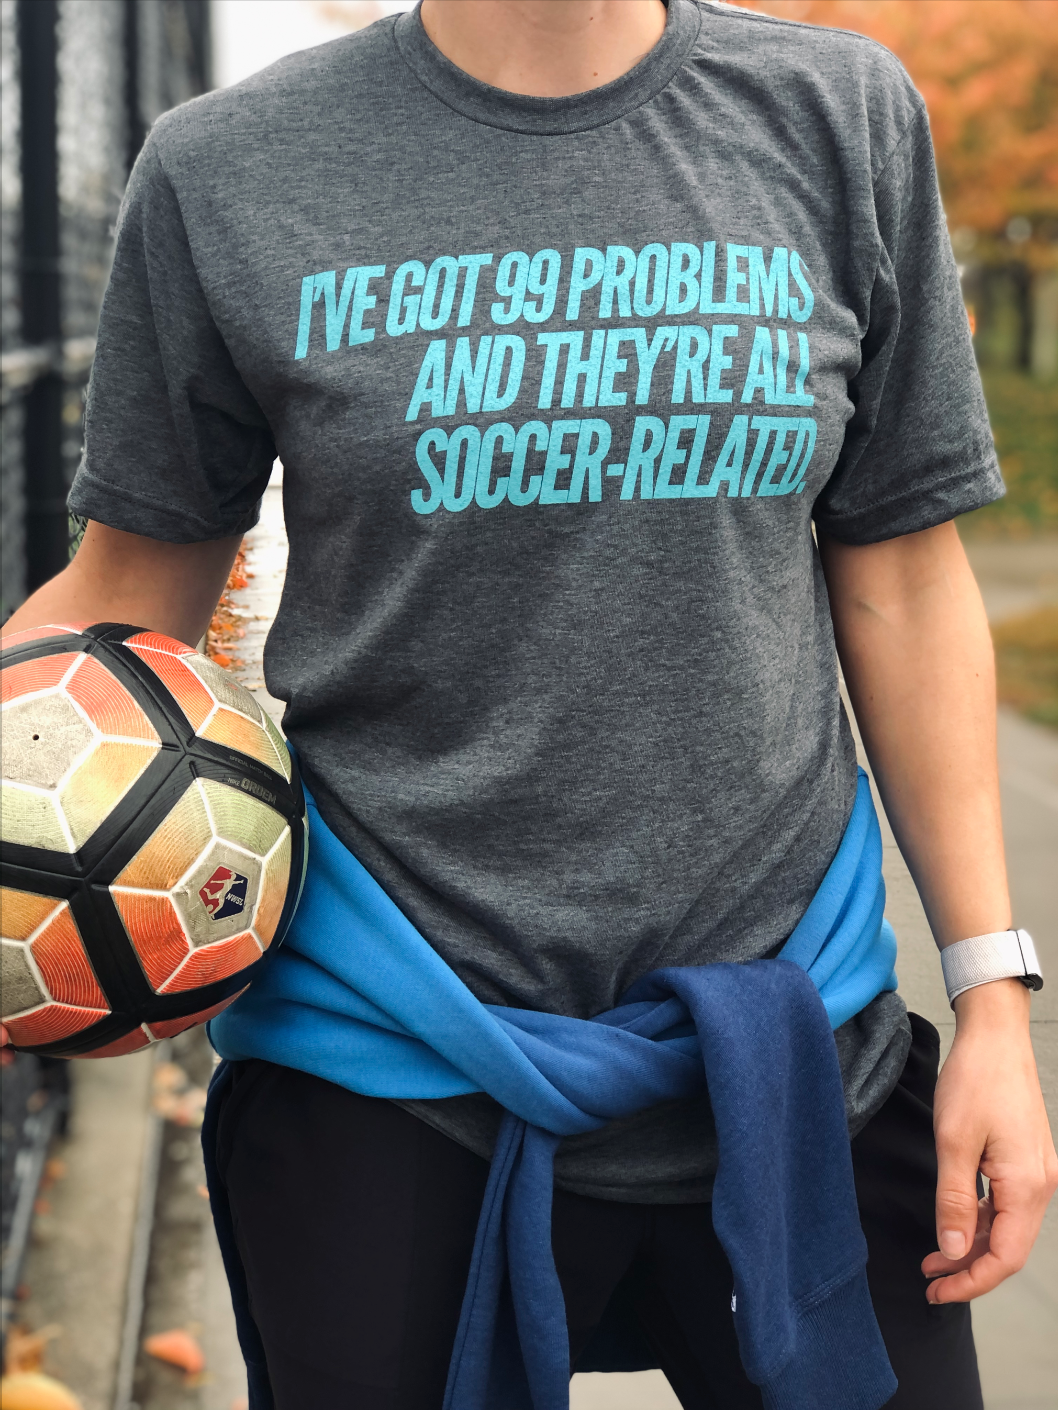 99 Soccer-Related Problems T-Shirt